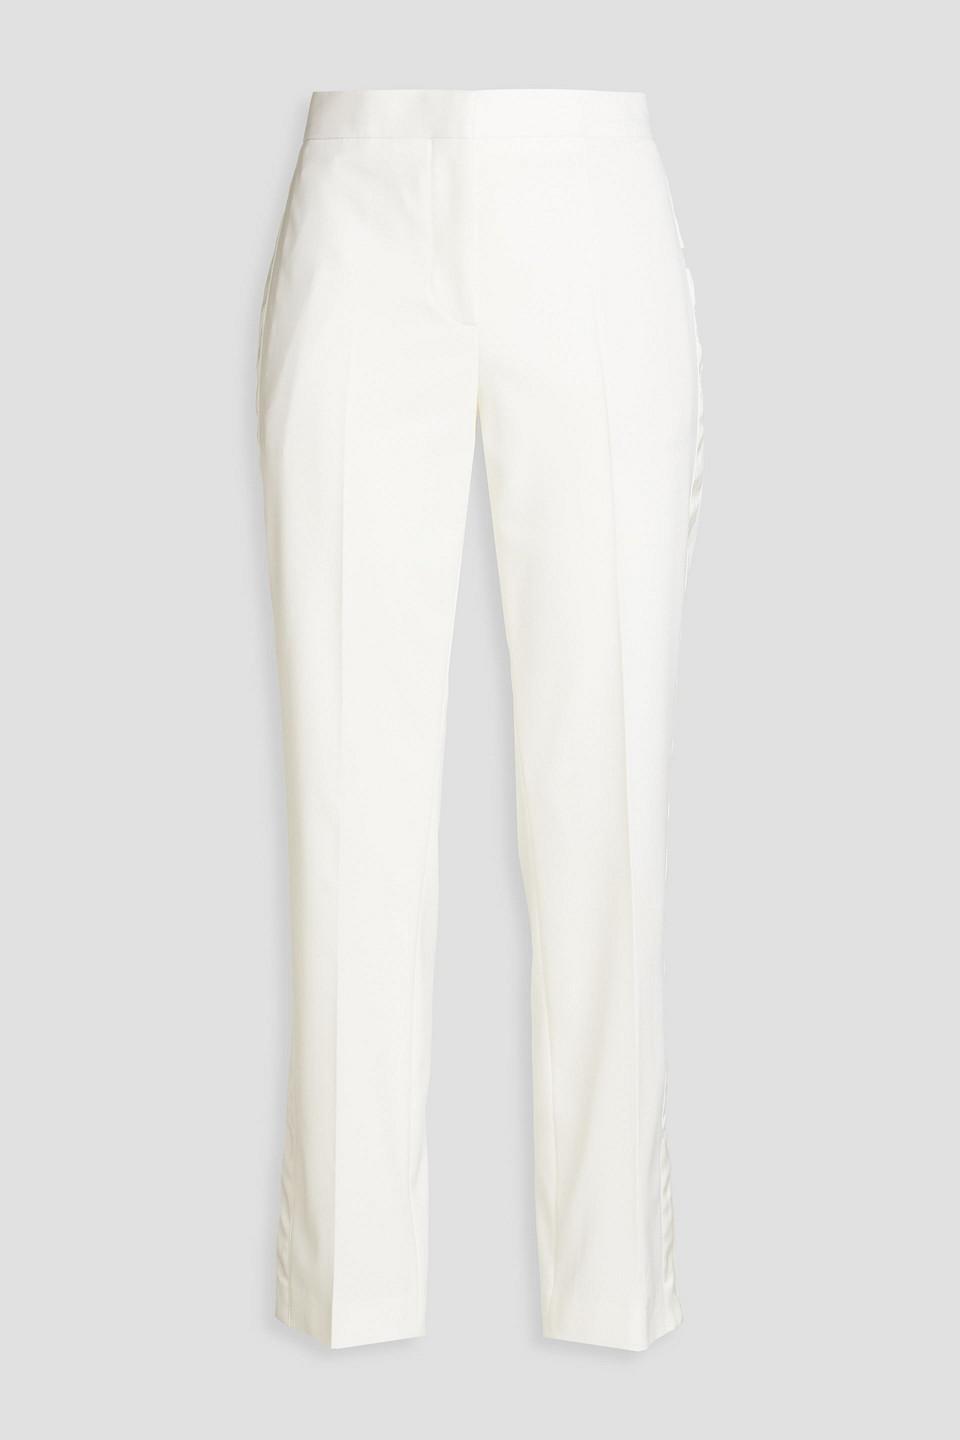 Paul Smith Satin-trimmed Wool-blend Tapered Pants in White | Lyst